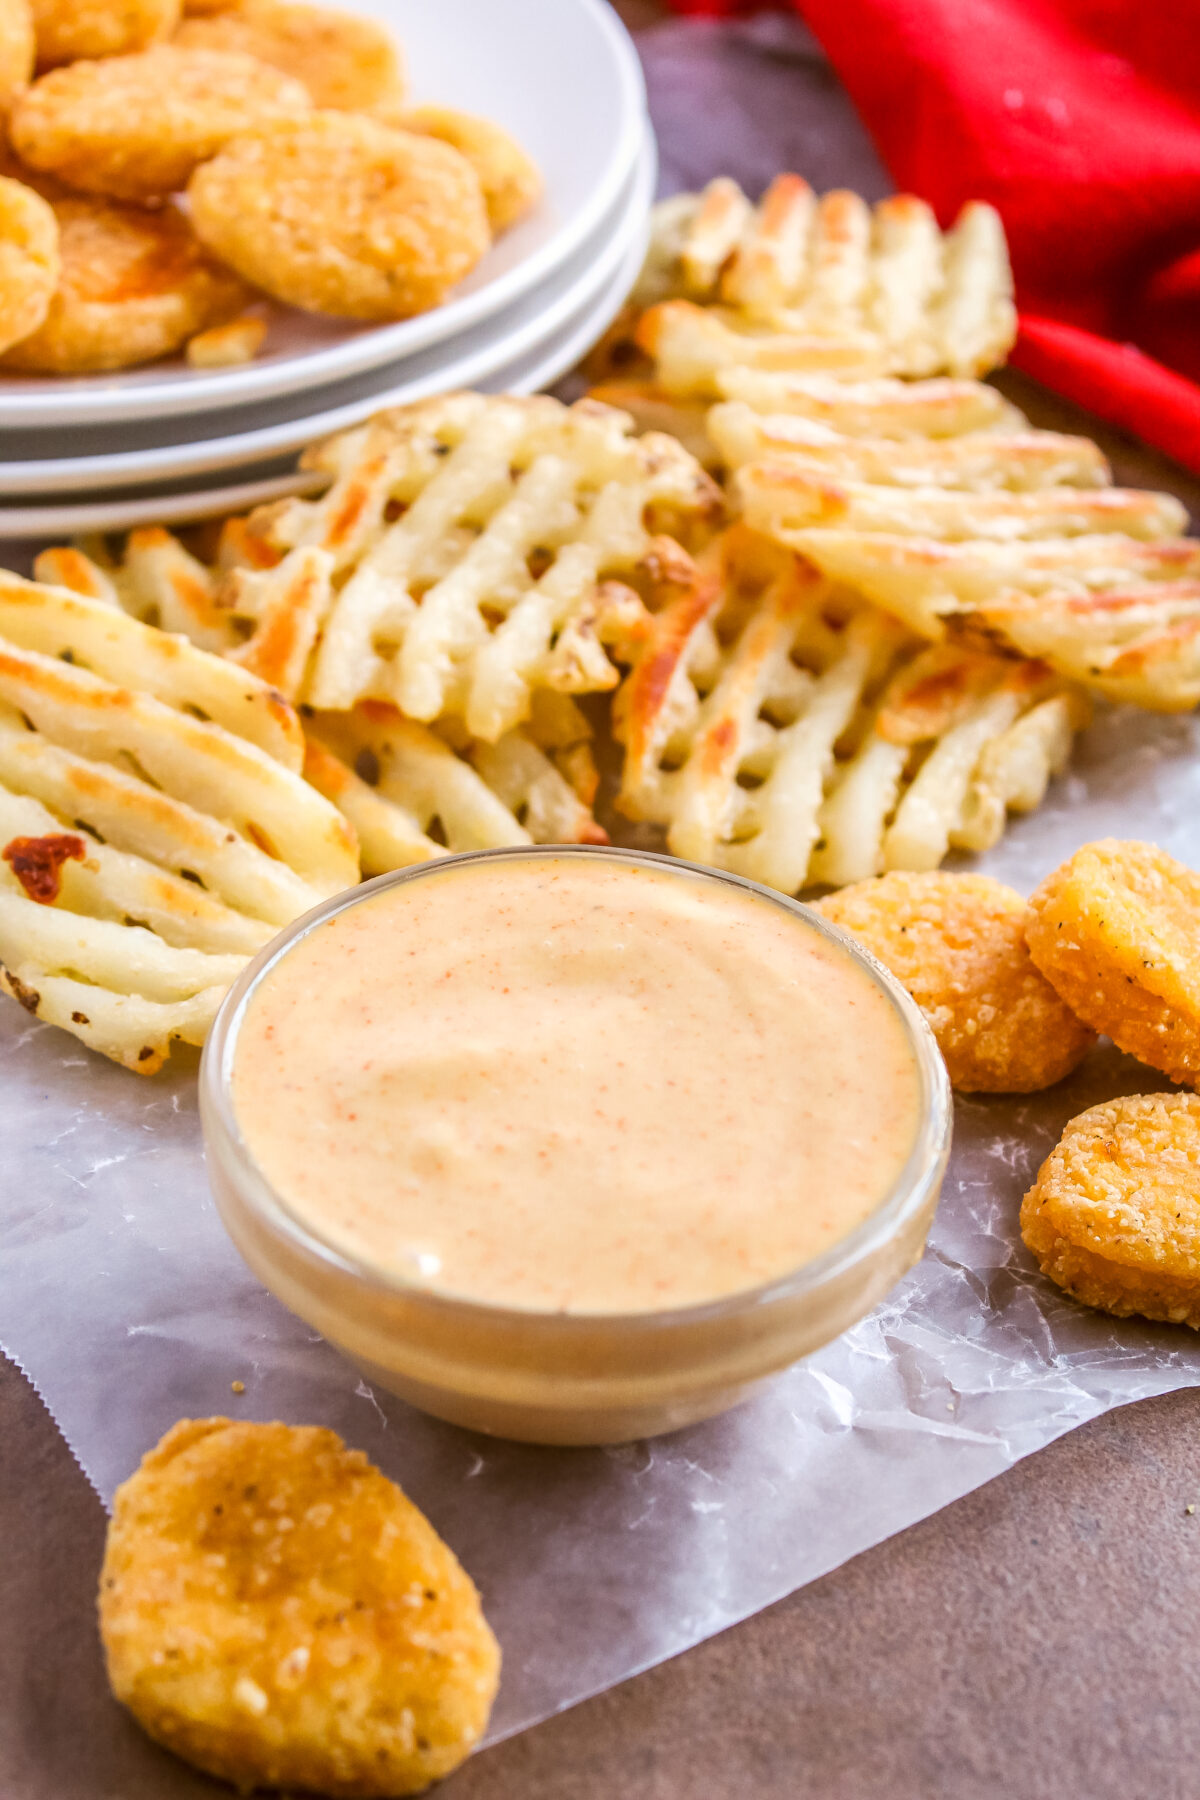 Love Chick-Fil-A? Wish you could make their delicious sauce at home? Now you can with this easy Copycat Chick-Fil-A Sauce Recipe!